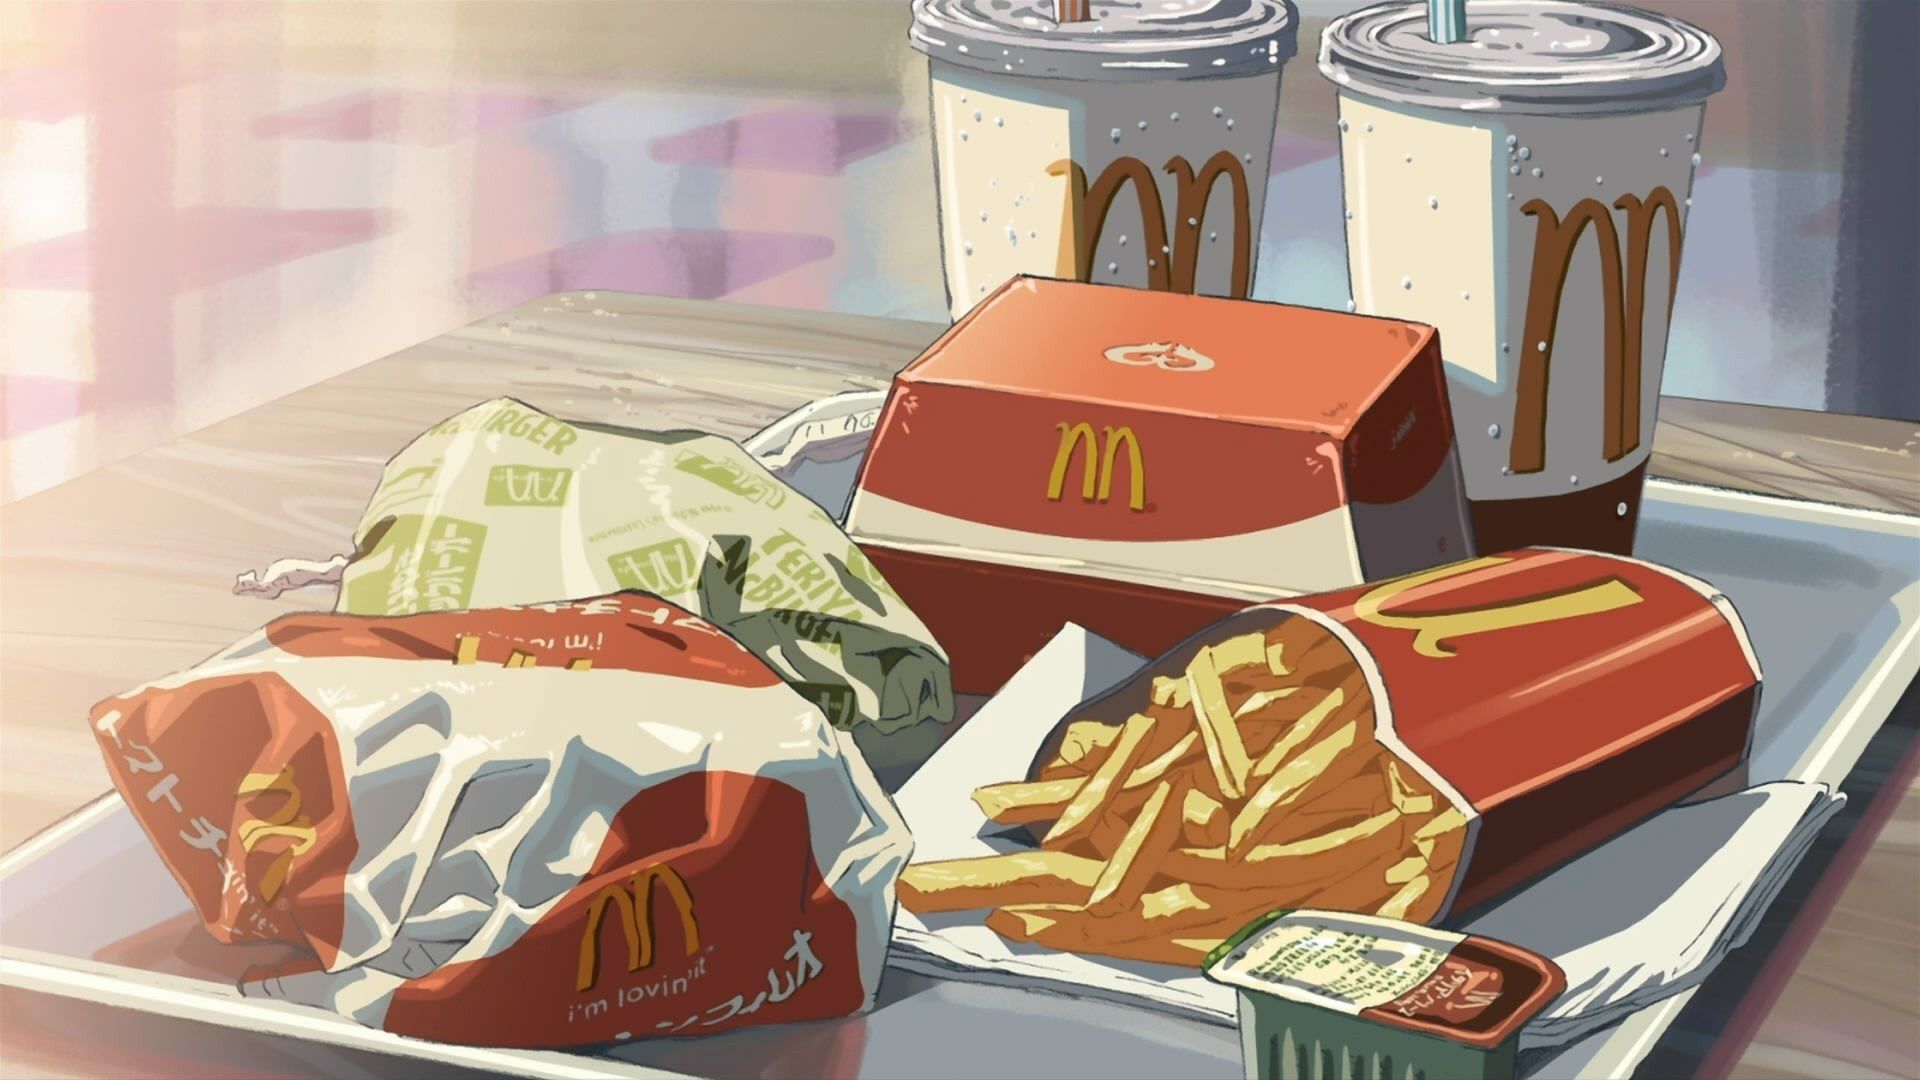 A still from the anime film 'Lofi Girl: Living in the Fast Lane', showing a tray of McDonald's food and drinks. - Food